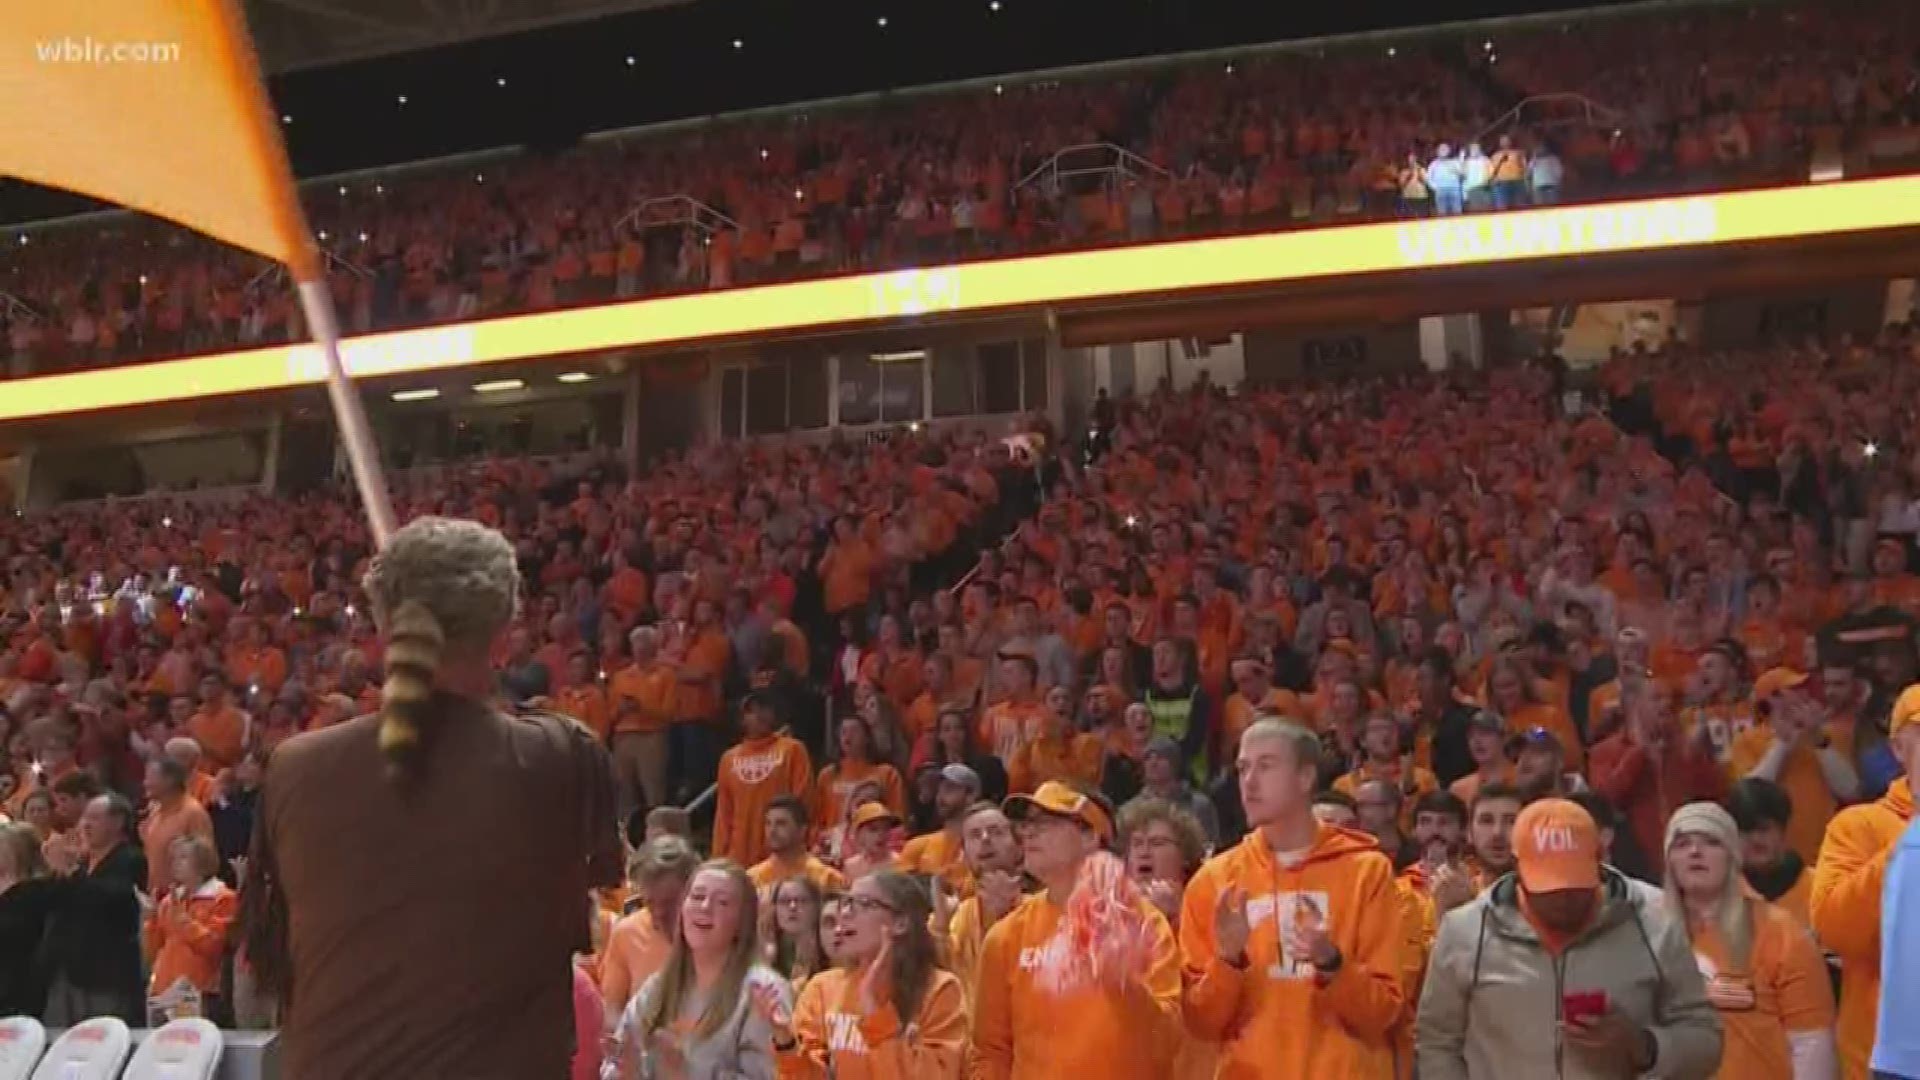 Vol fans know how loud basketball games can get in Knoxville, and now so does everyone else.